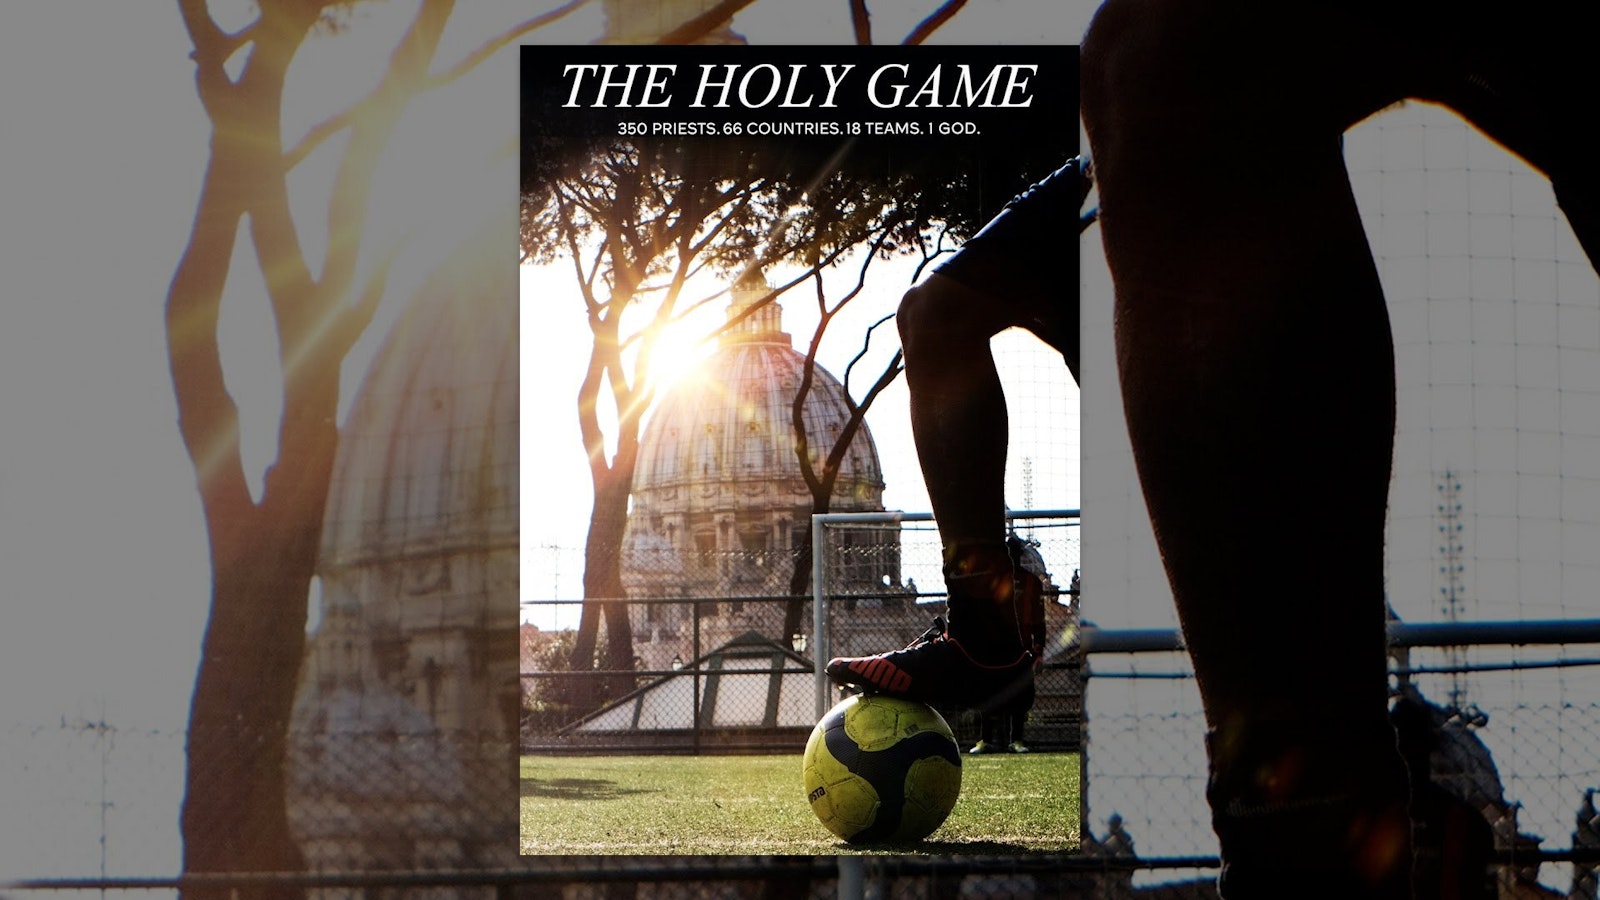 A promotional image for "The Holy Game" a documentary by Canadian filmmakers Brent Hodge and Chris Kelly that explores the intersection of faith, sports and priestly vocation. (Screengrab via YouTube)